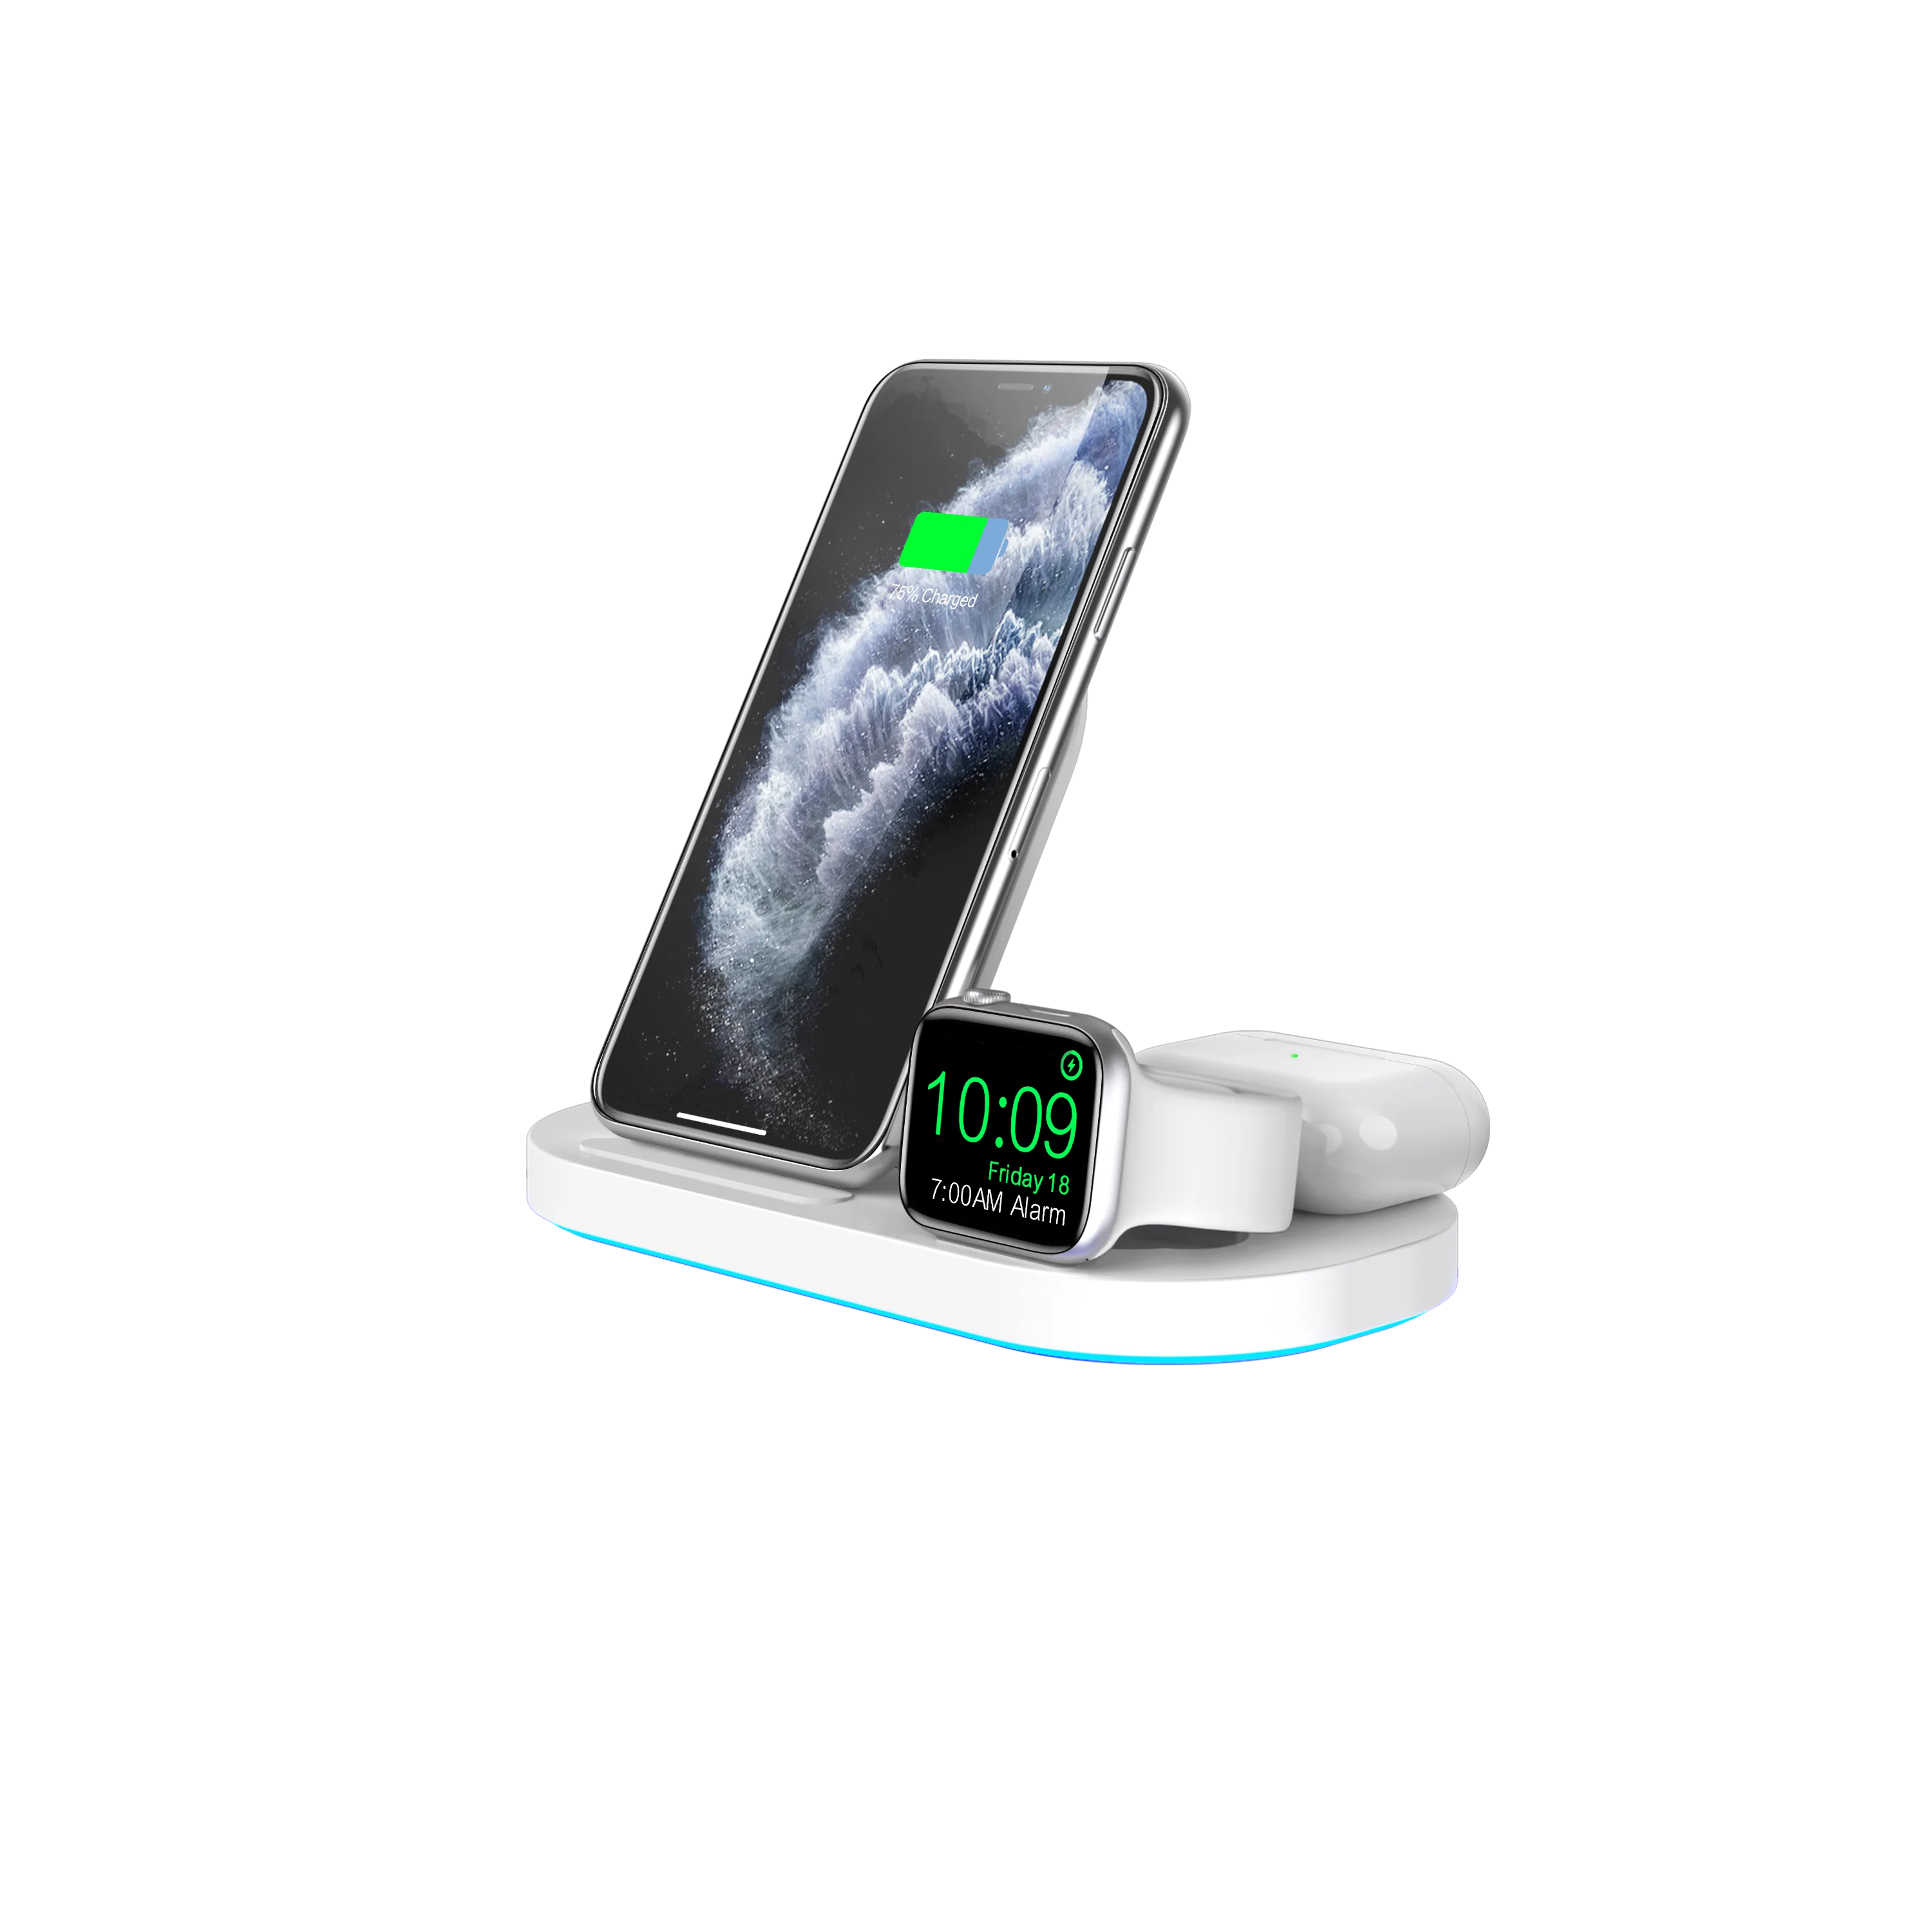 

2022 New Trending 3 In One Qi Wireless Charger 15W Foldable Fast Wireless Charging Station Stand For iphone iwatch airpods, Black / white